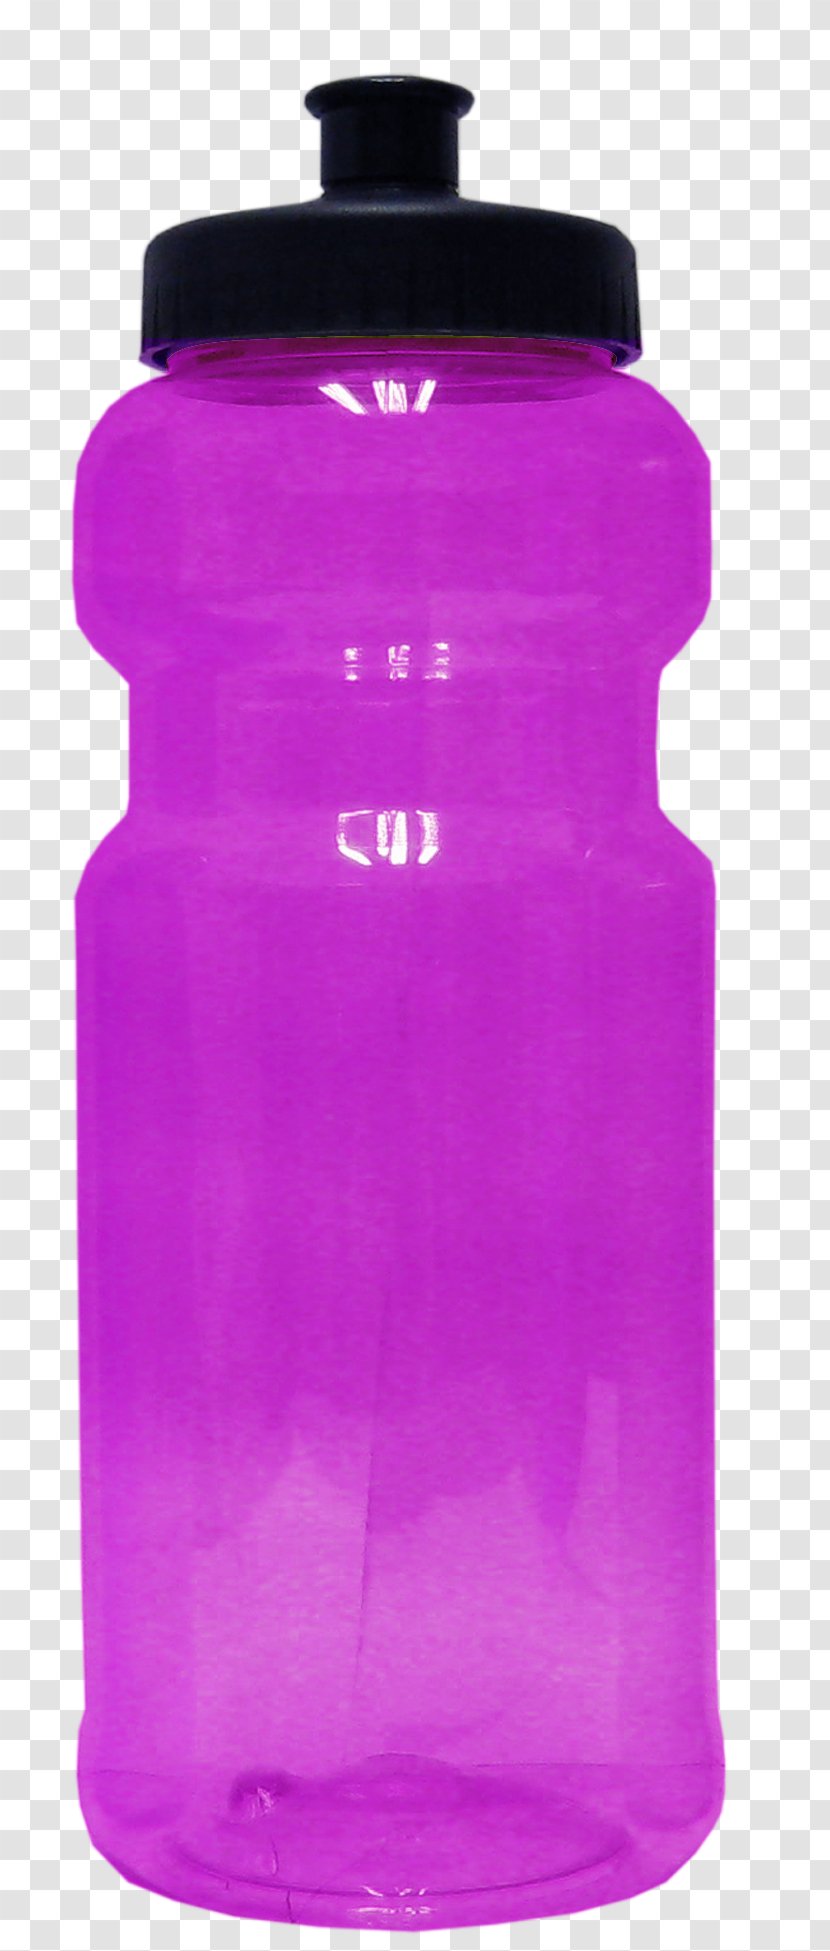 Water Bottles Plastic Bottle Glass - CILINDRO Transparent PNG